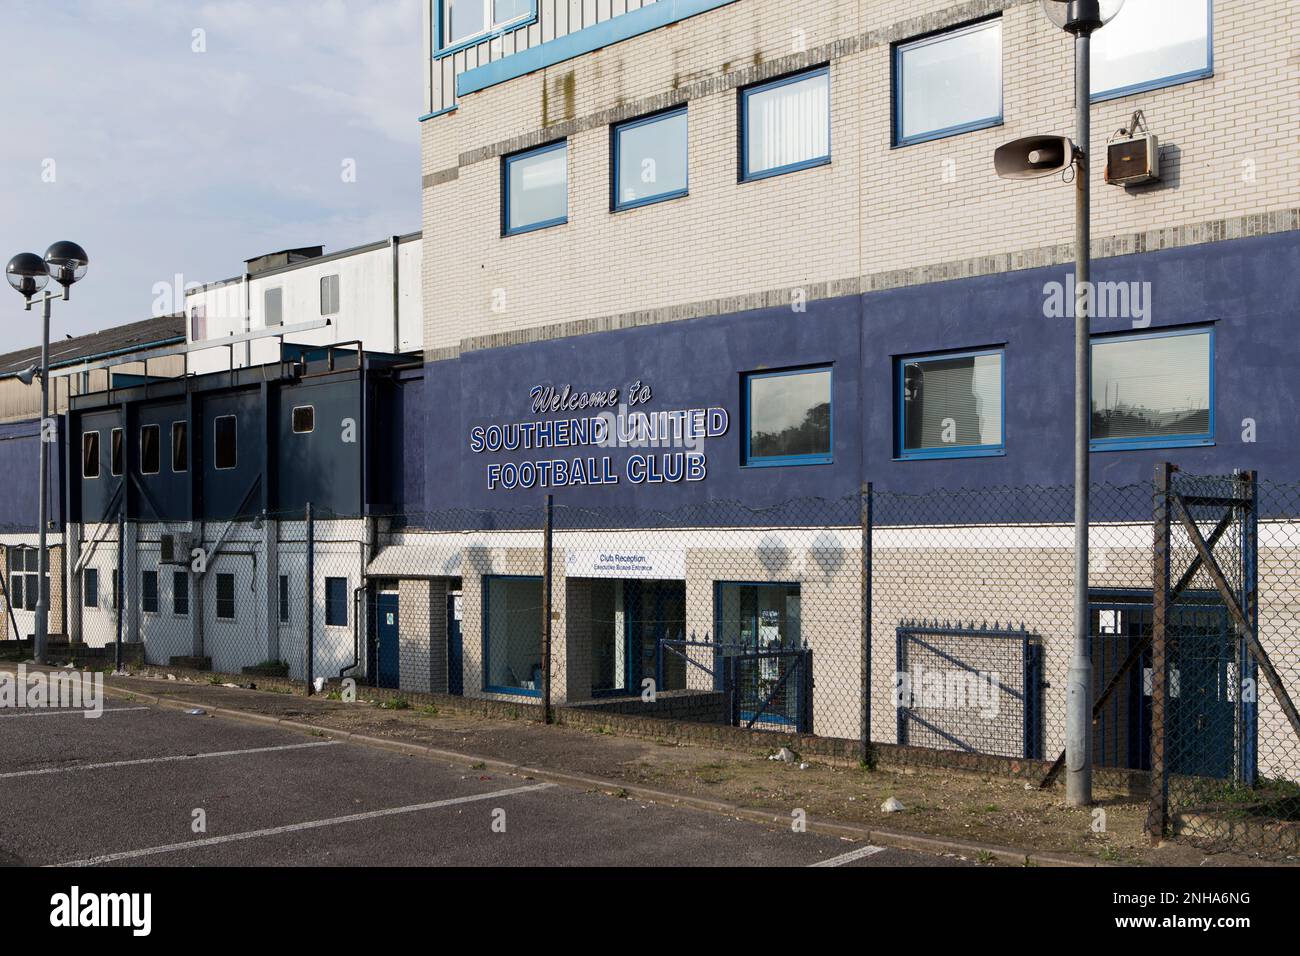 Hauptbüro des Southend United Football Clubs in der Roots Hall, Southend-on-Sea, Essex. Blaues Schild mit der Aufschrift „We(l)com(e) to Southend United Football Club“. Stockfoto